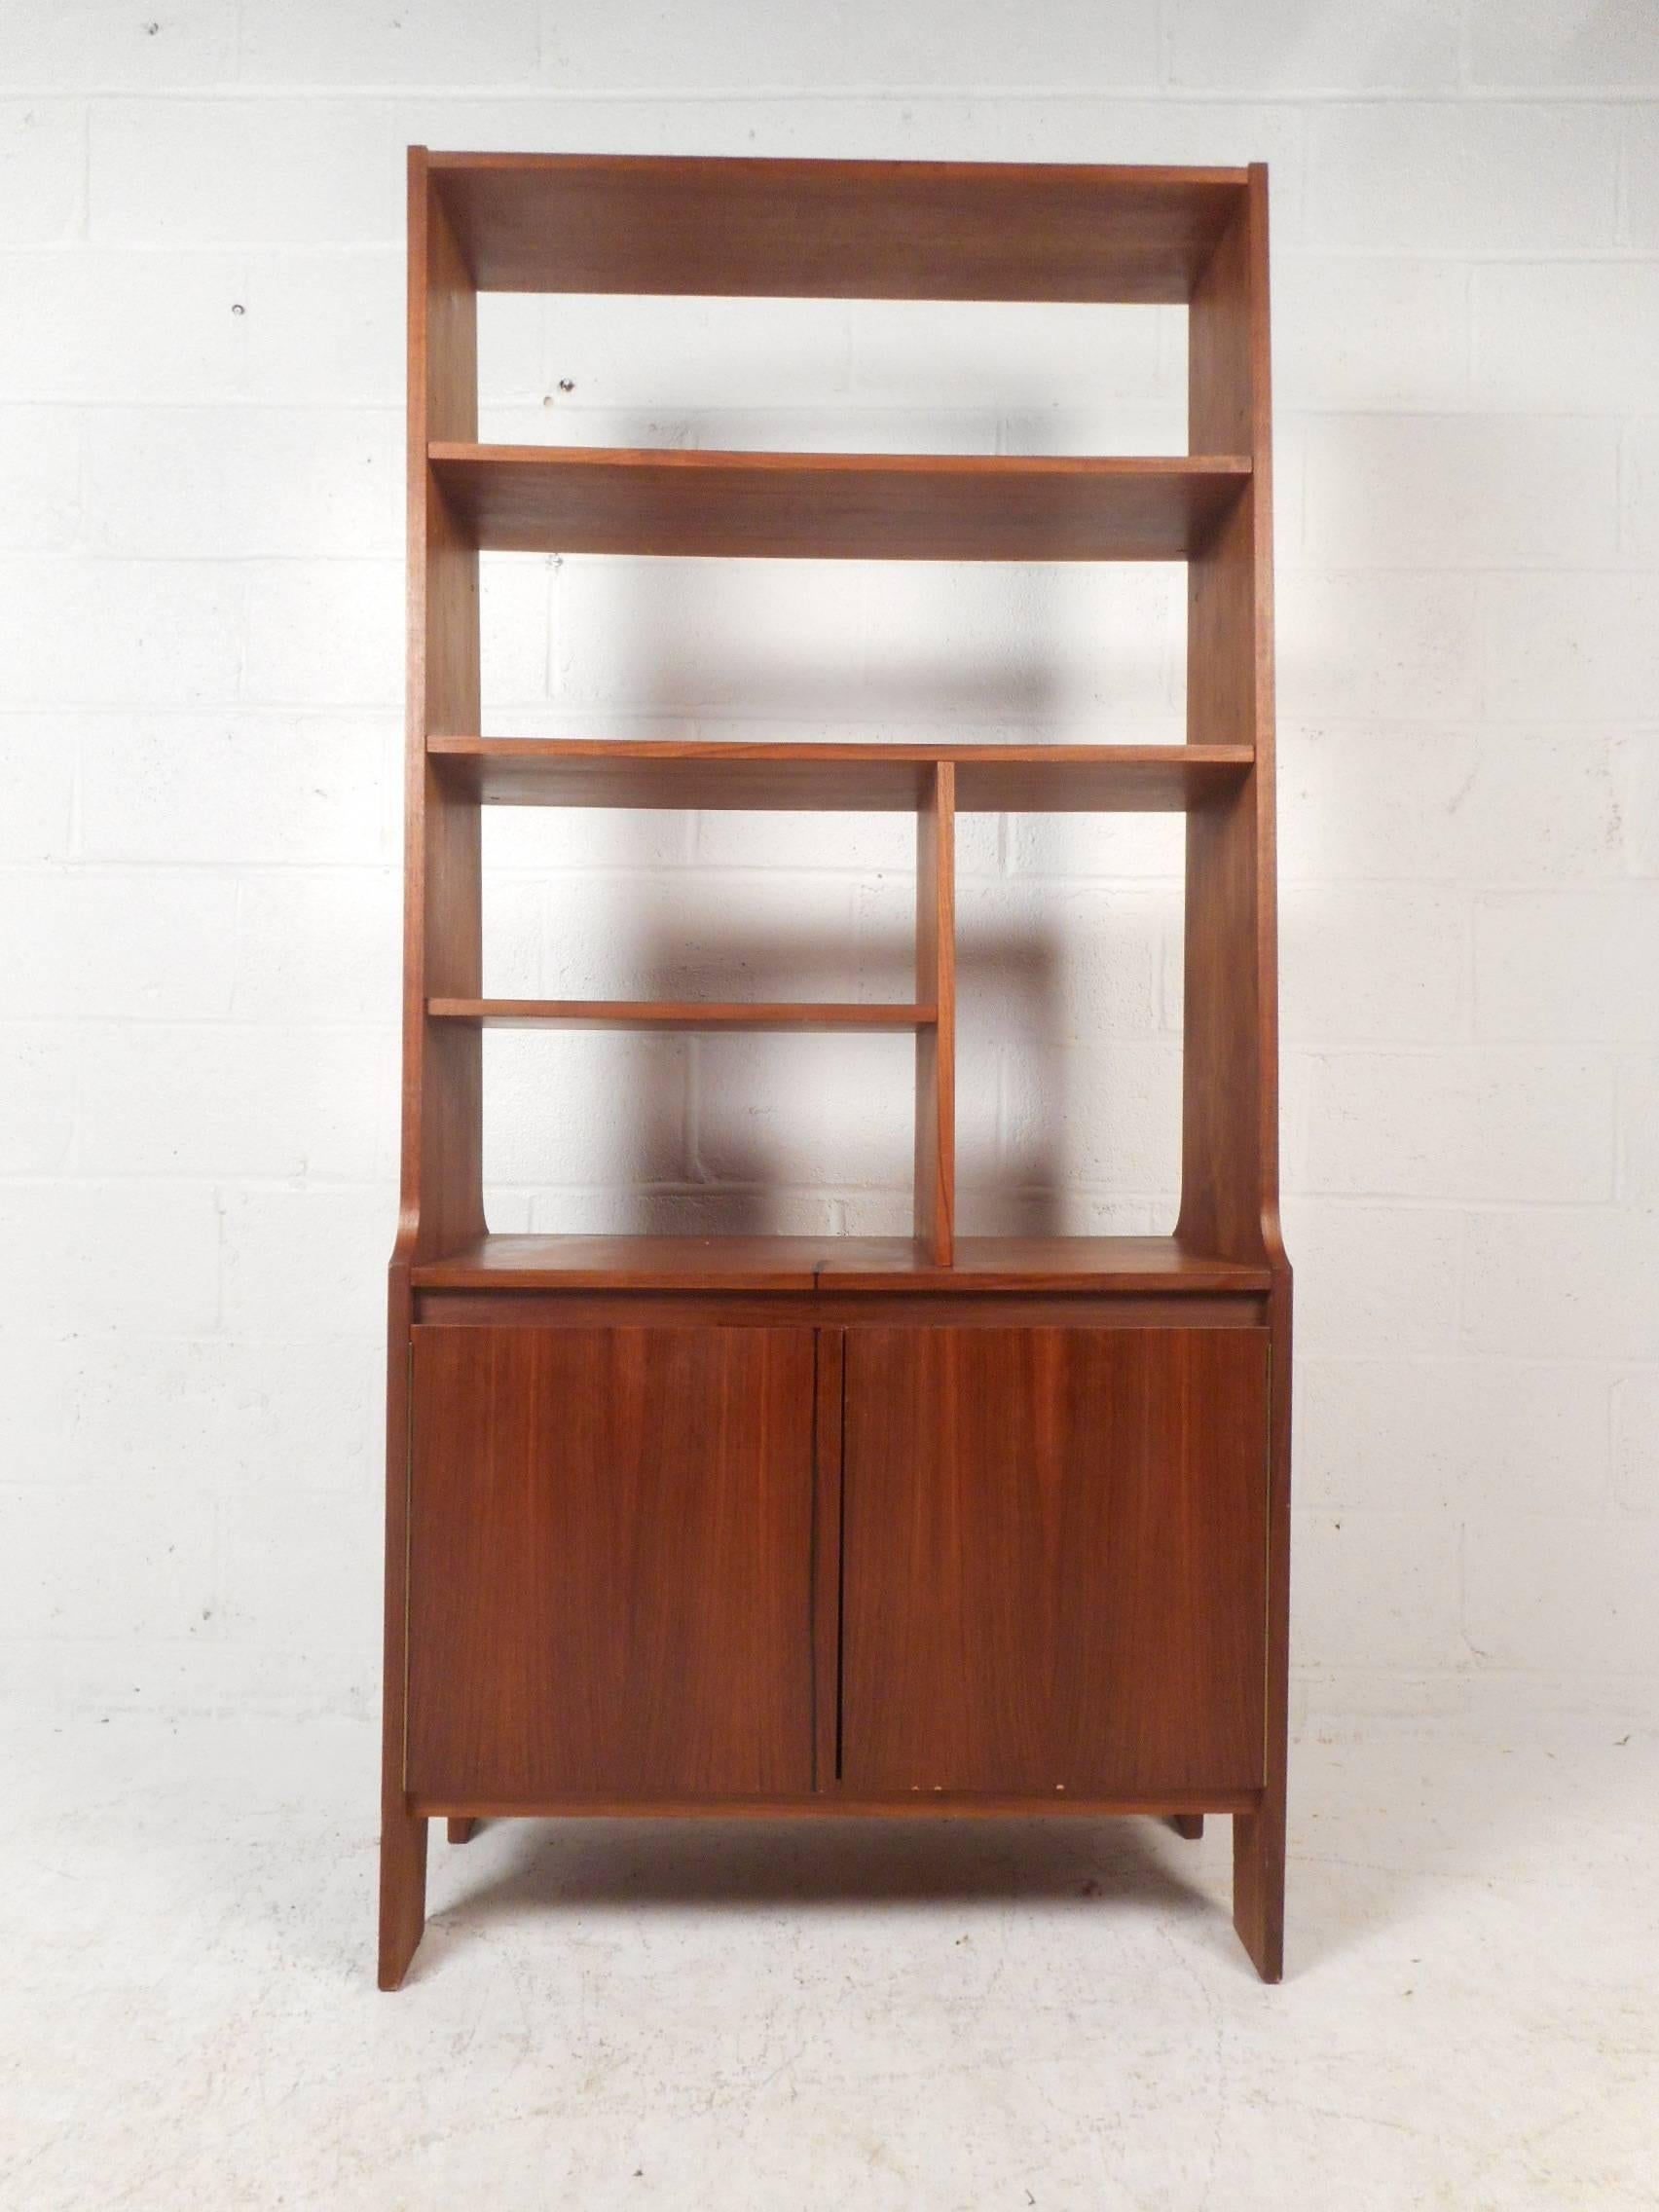 This beautiful Mid-Century Modern walnut room divider features five shelves that have various sizes and a large compartment on the bottom with a shelf for storage. Versatile design works great as an etagere, a book shelf, or a room divider. Sturdy